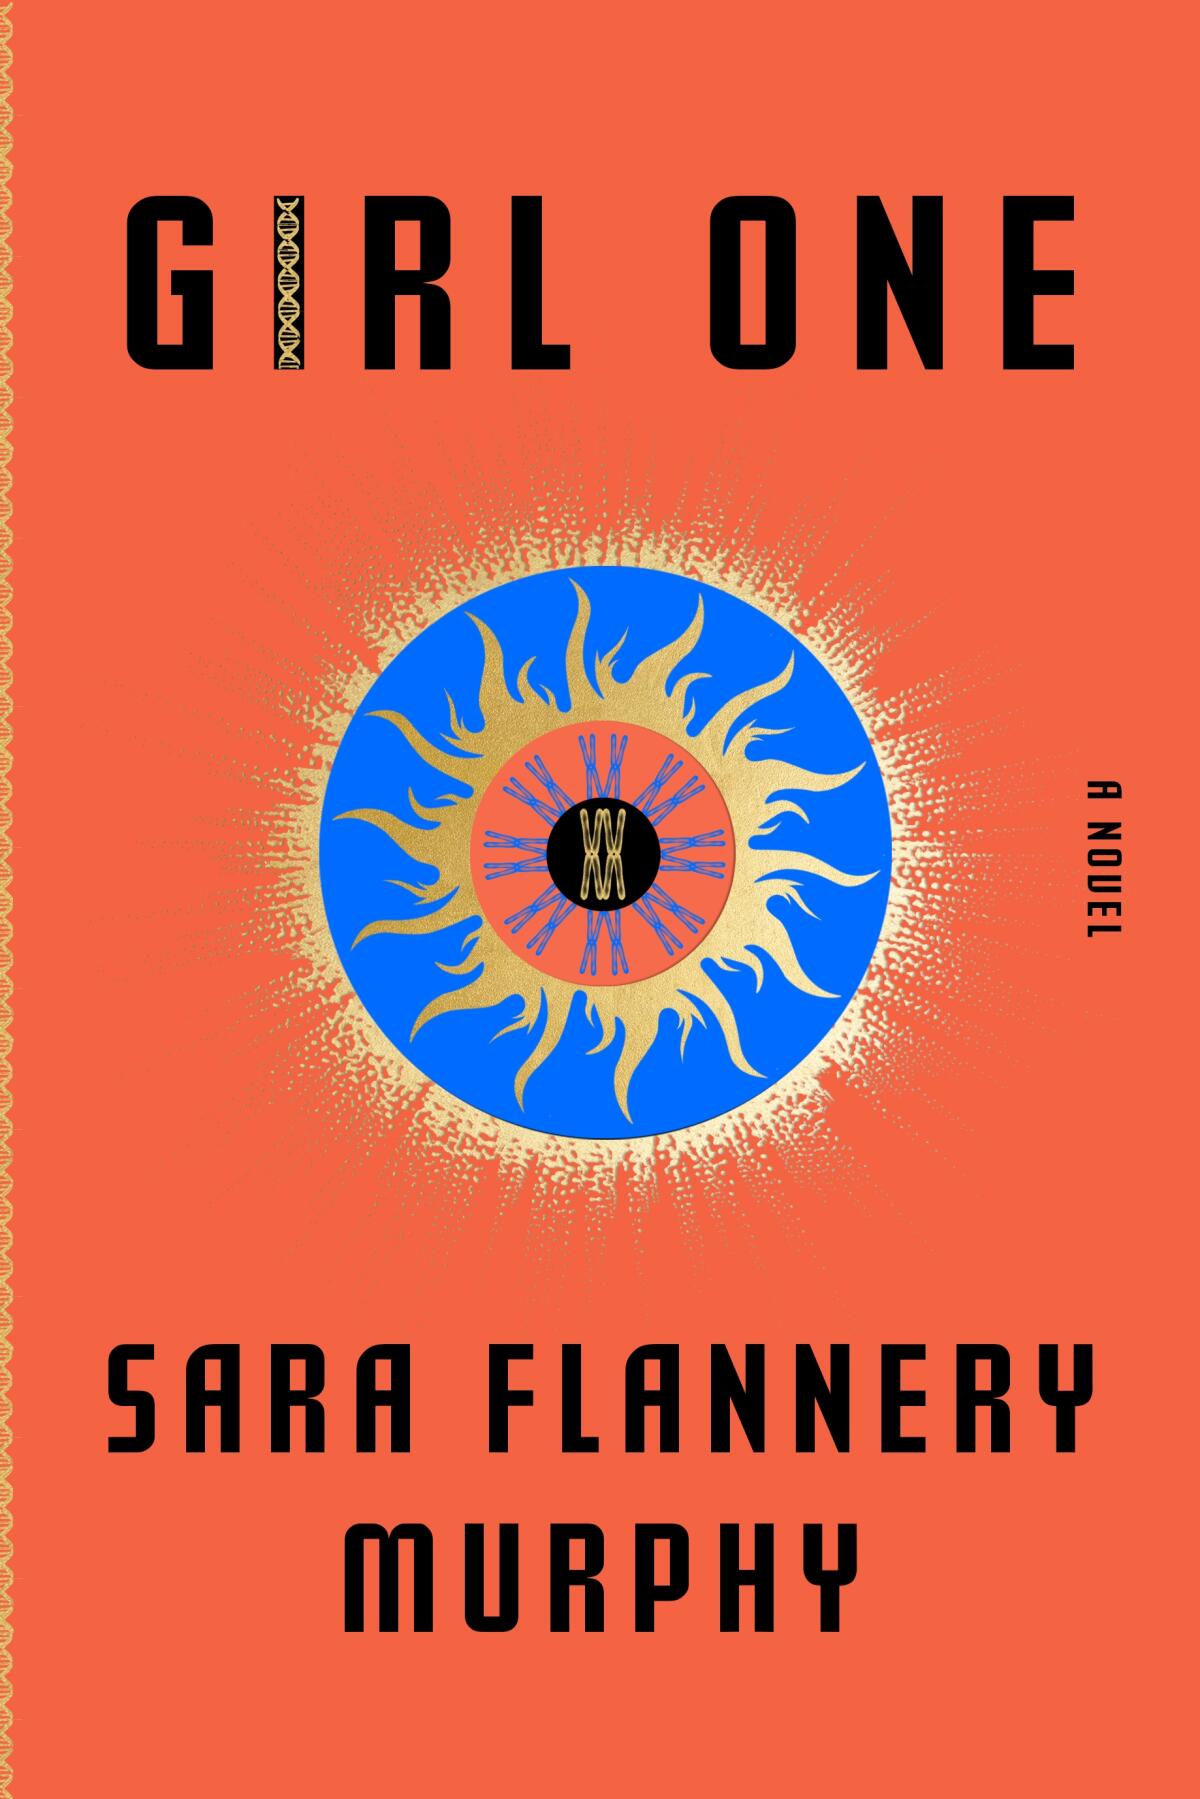 The cover of the book "Girl One," by Sara Flannery Murphy